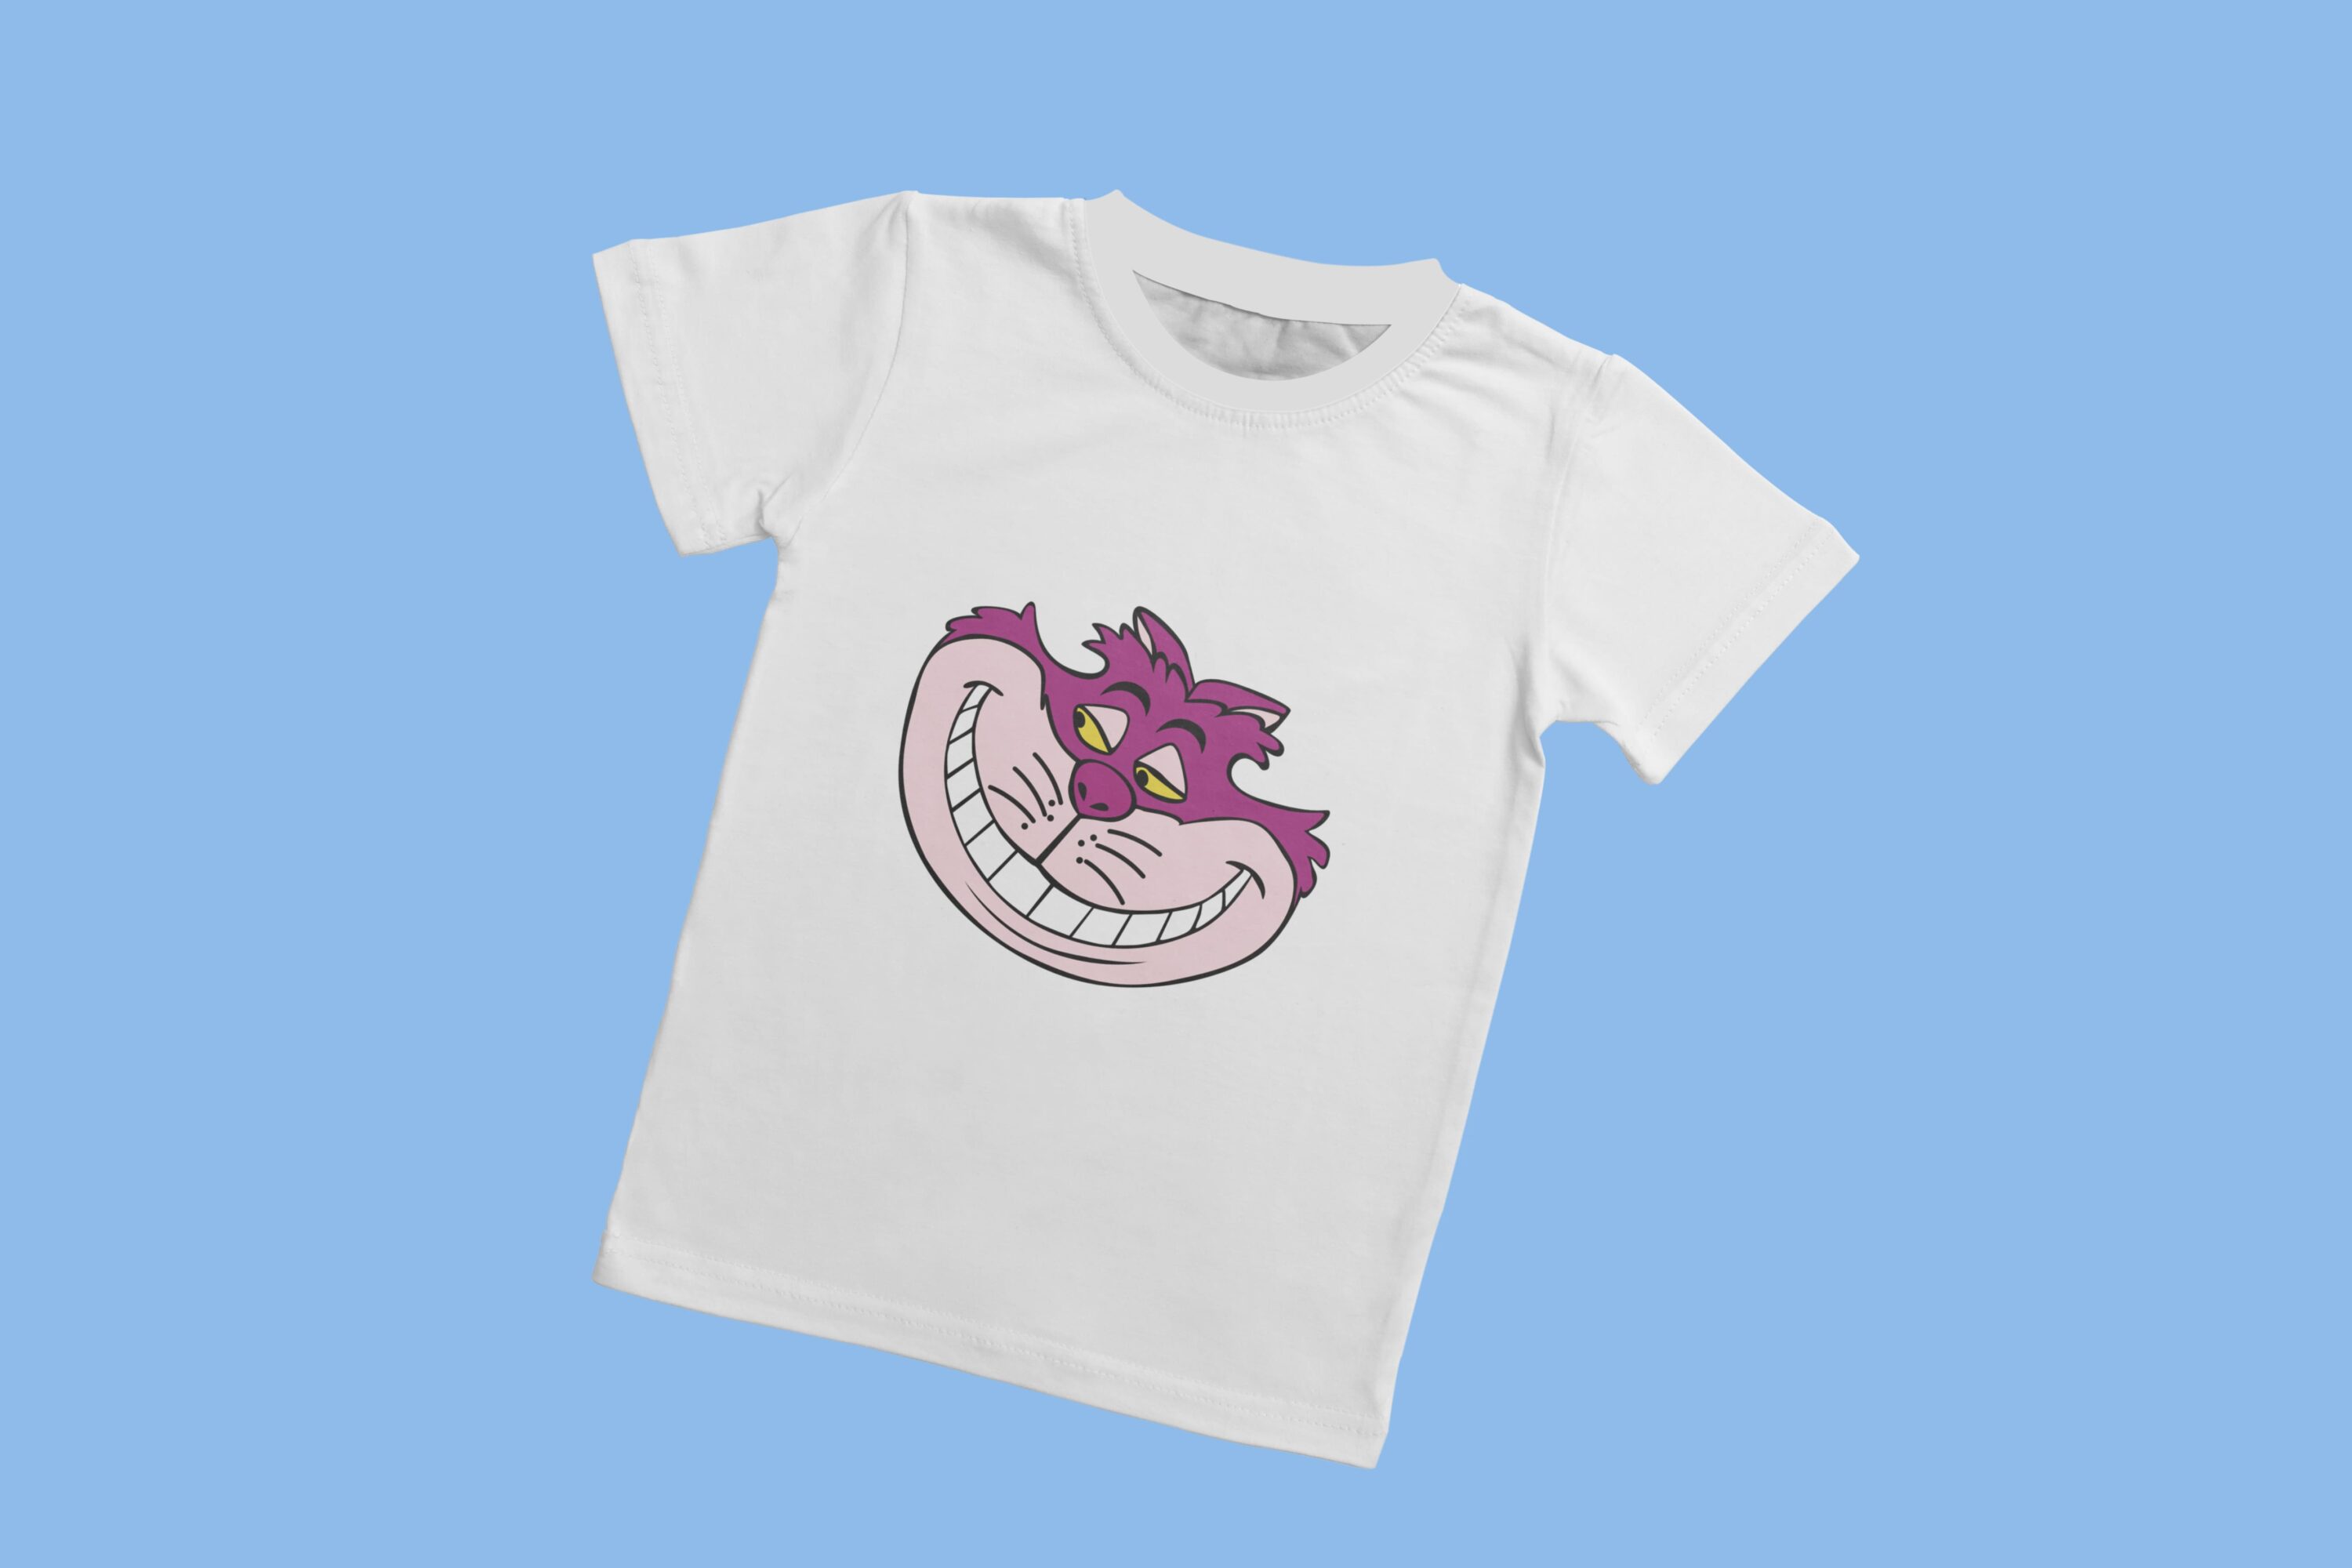 A white T-shirt with a white collar and the face of a Cheshire cat looking to the left, on a blue background.